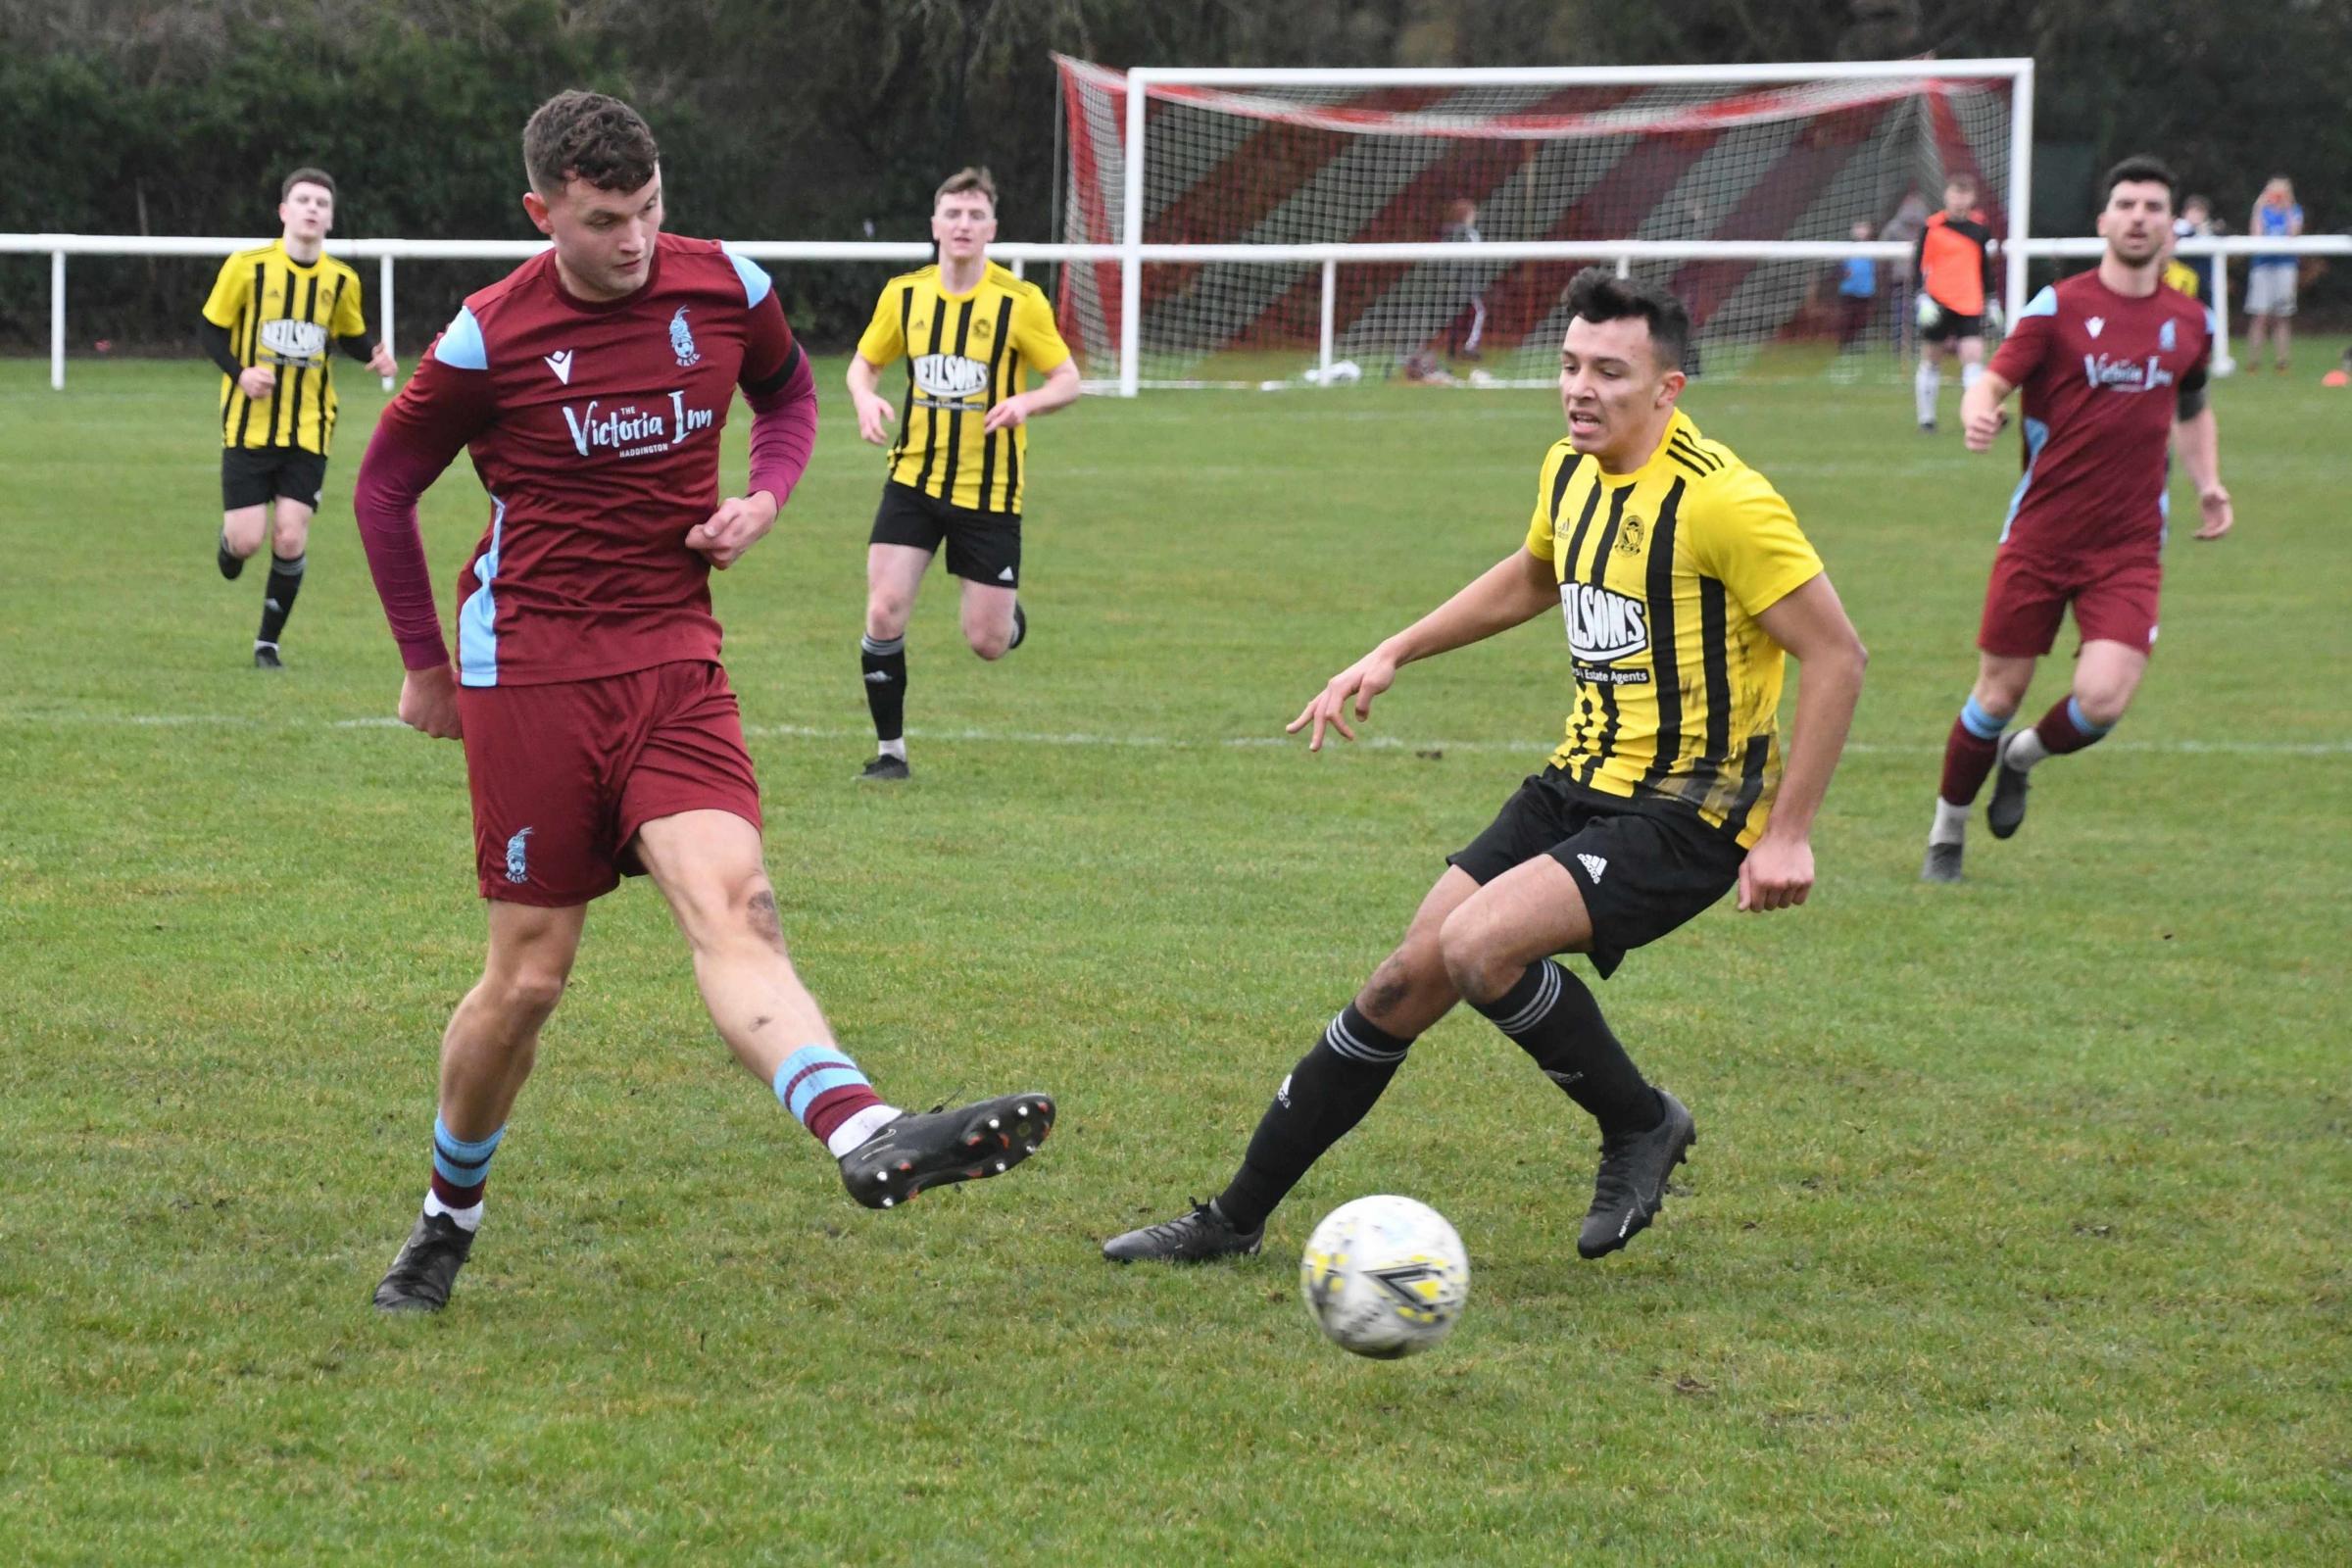 Haddington Athletic (maroon) are away to Luncarty this afternoon (Saturday). Image: Garry Menzies